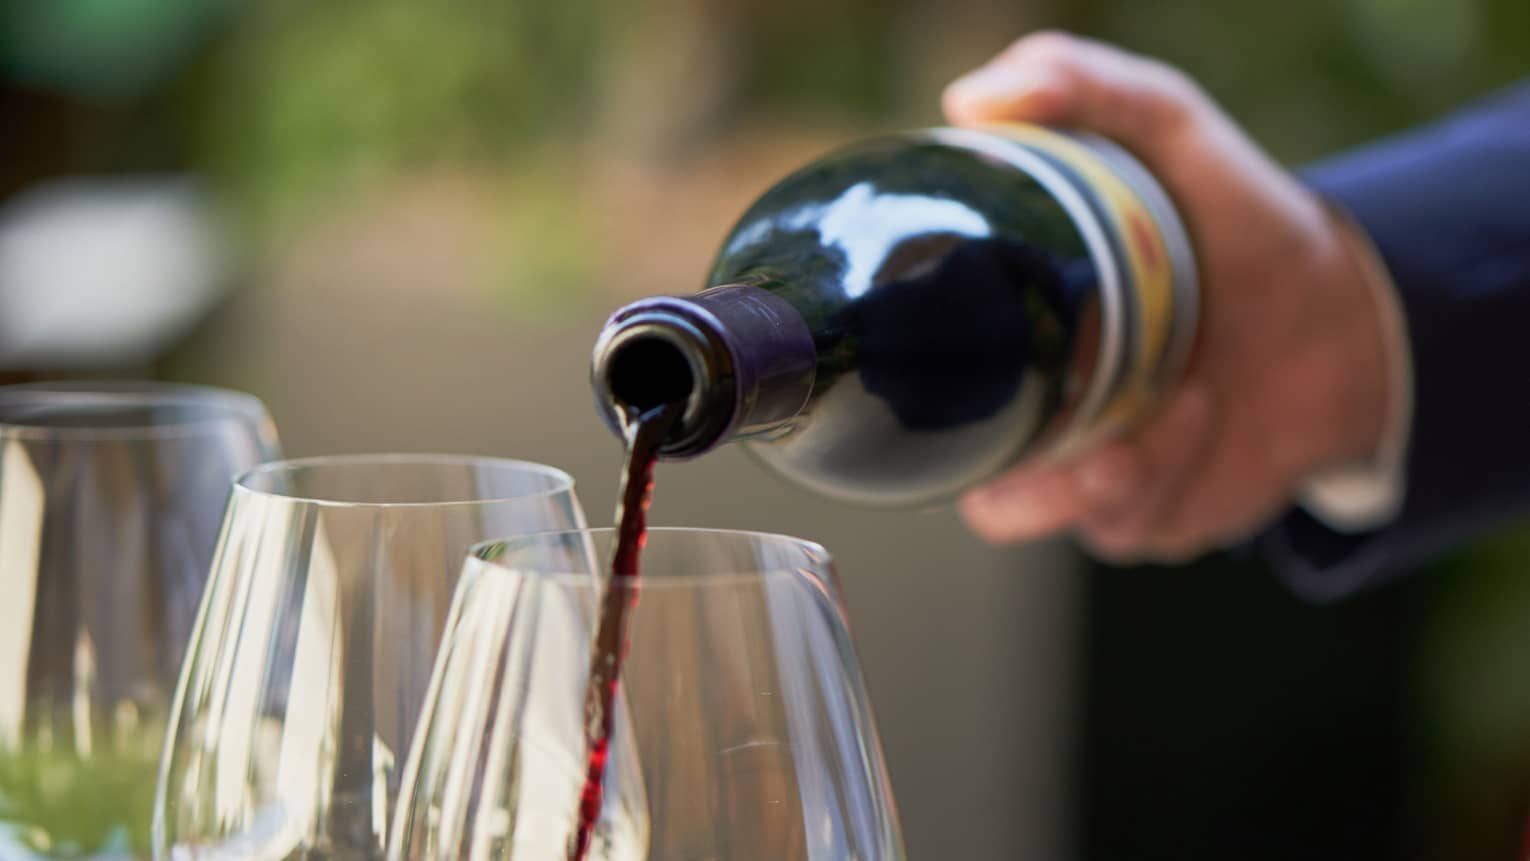 A close up of hands pouring a bottle of red wine into a clear wine glass that rests on a wooden tray, outdoors